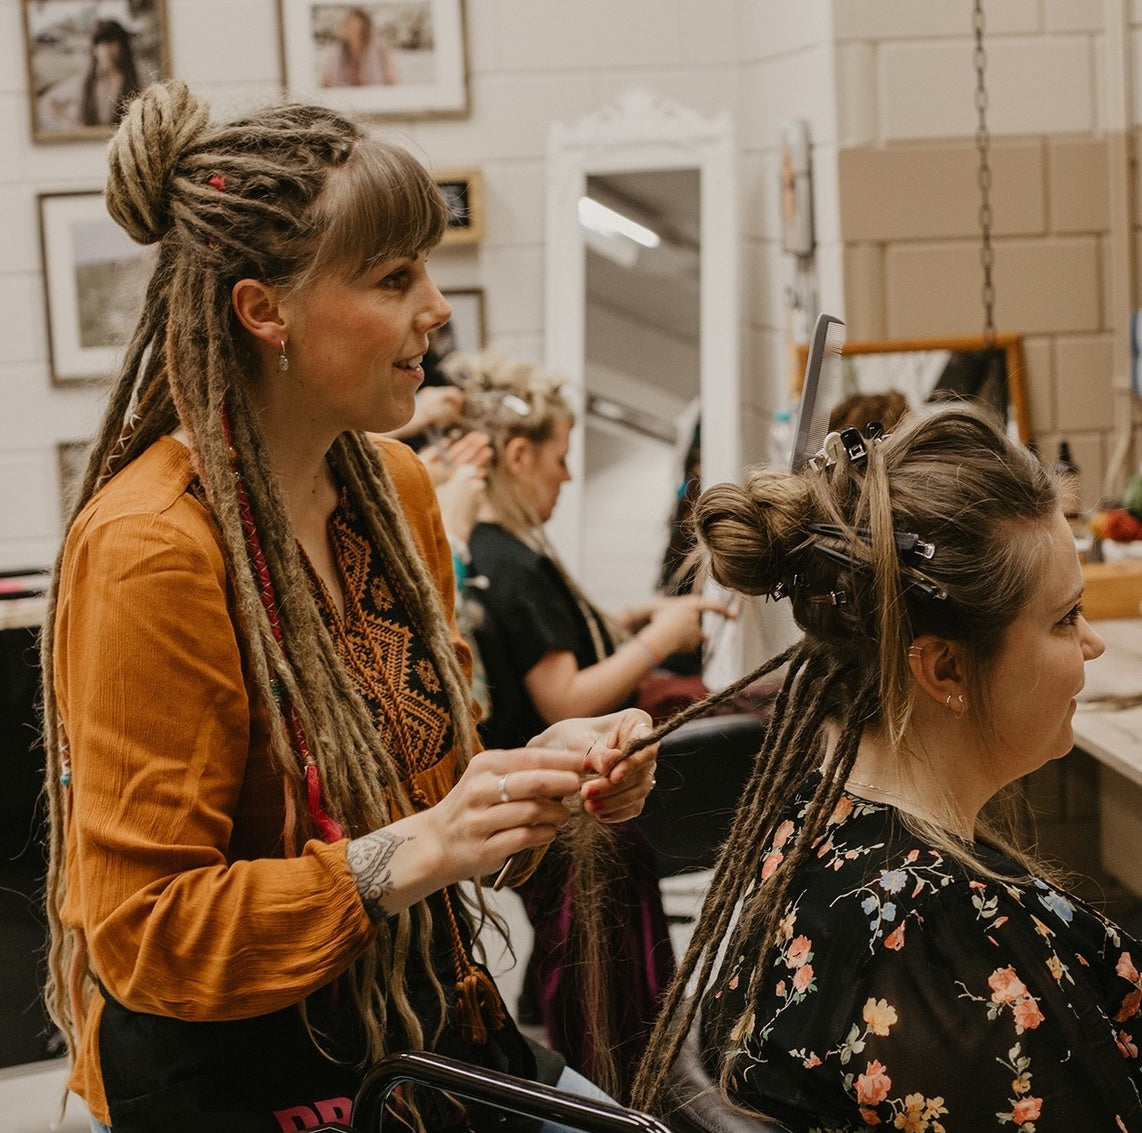 Become an Allround Dreadlock Stylist? Follow the Dreadshop online courses! But which course do you start with?